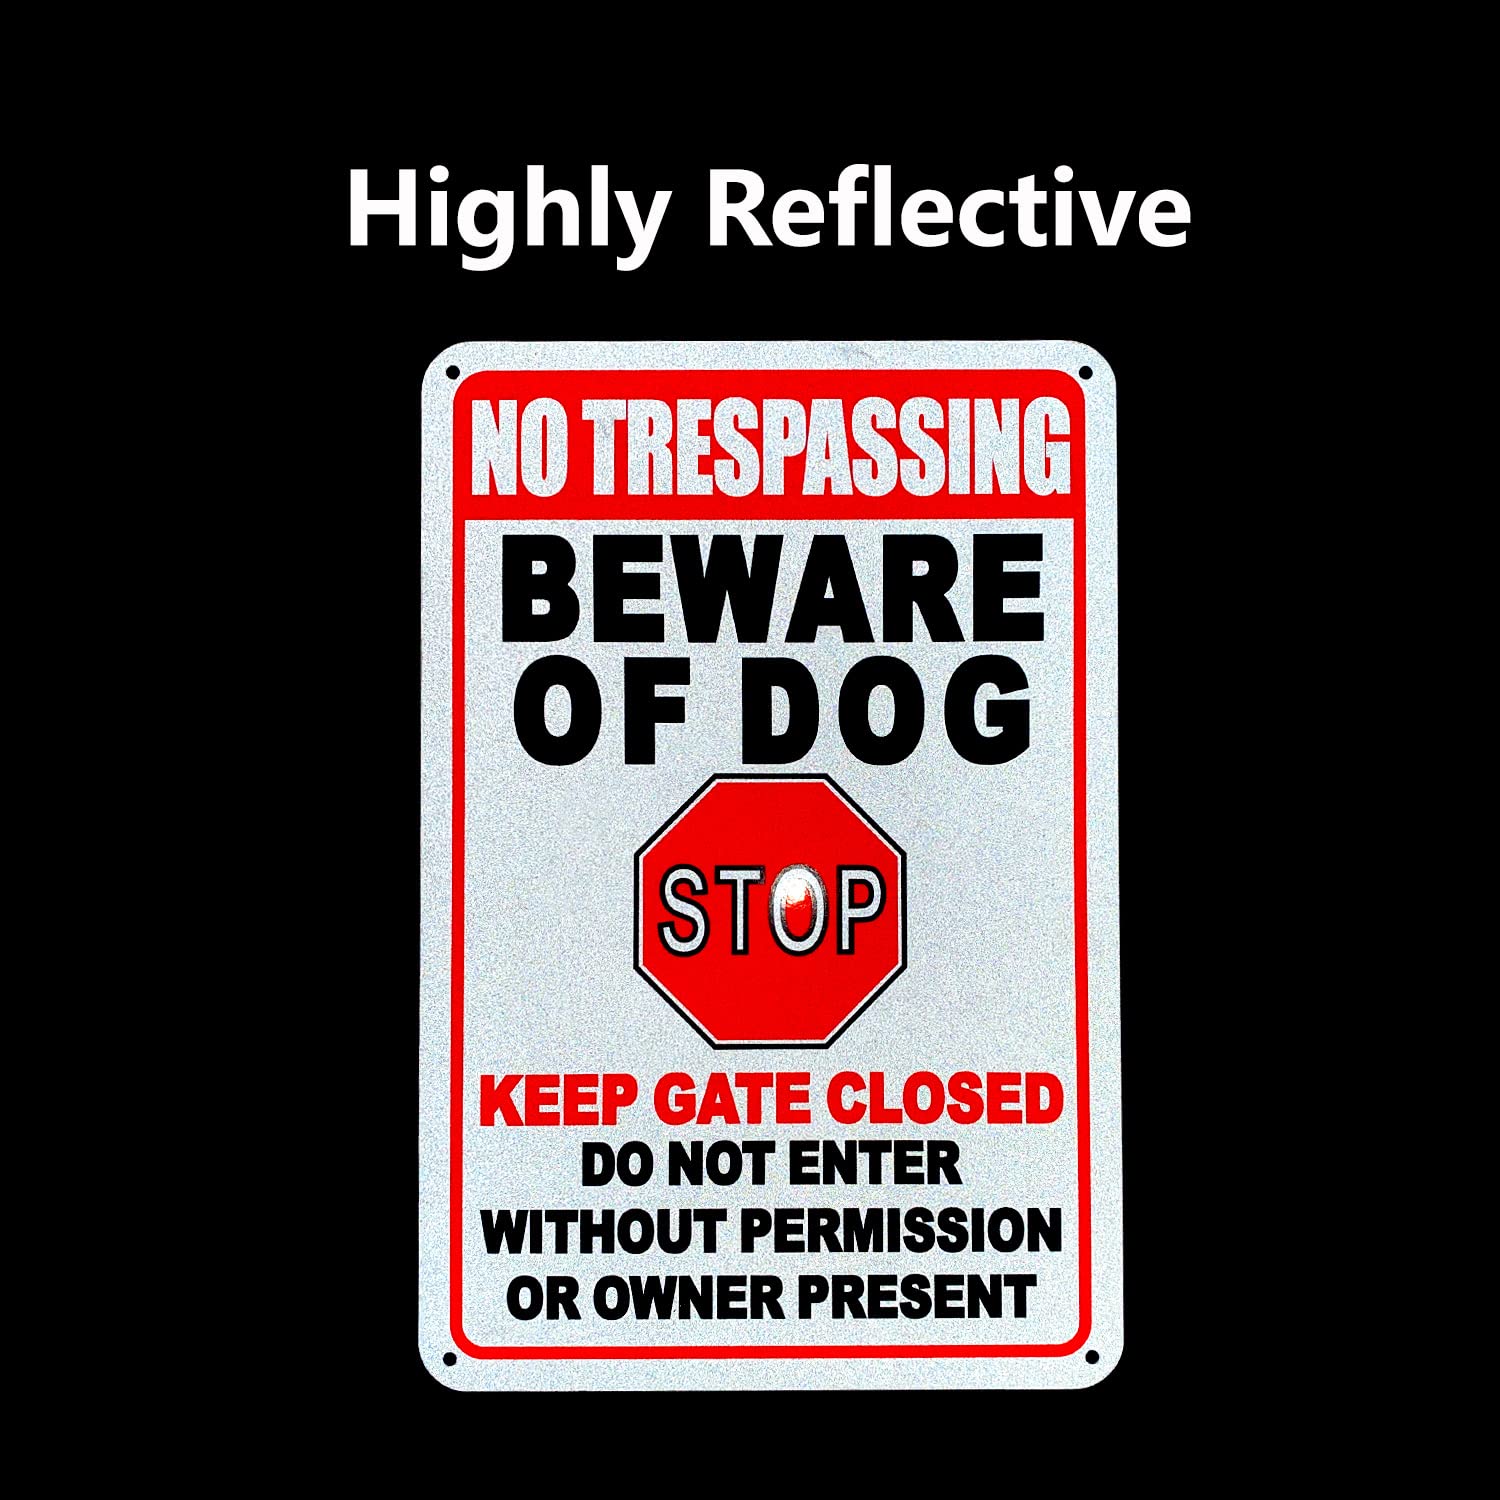 No Trespassing Beware of Dogs Stop Keep Gate Closed Do Not Enter Without Permission or Owner Present Sign for Room Wall Bathroom Decoration 12 x 8 Inch (2 Pack)